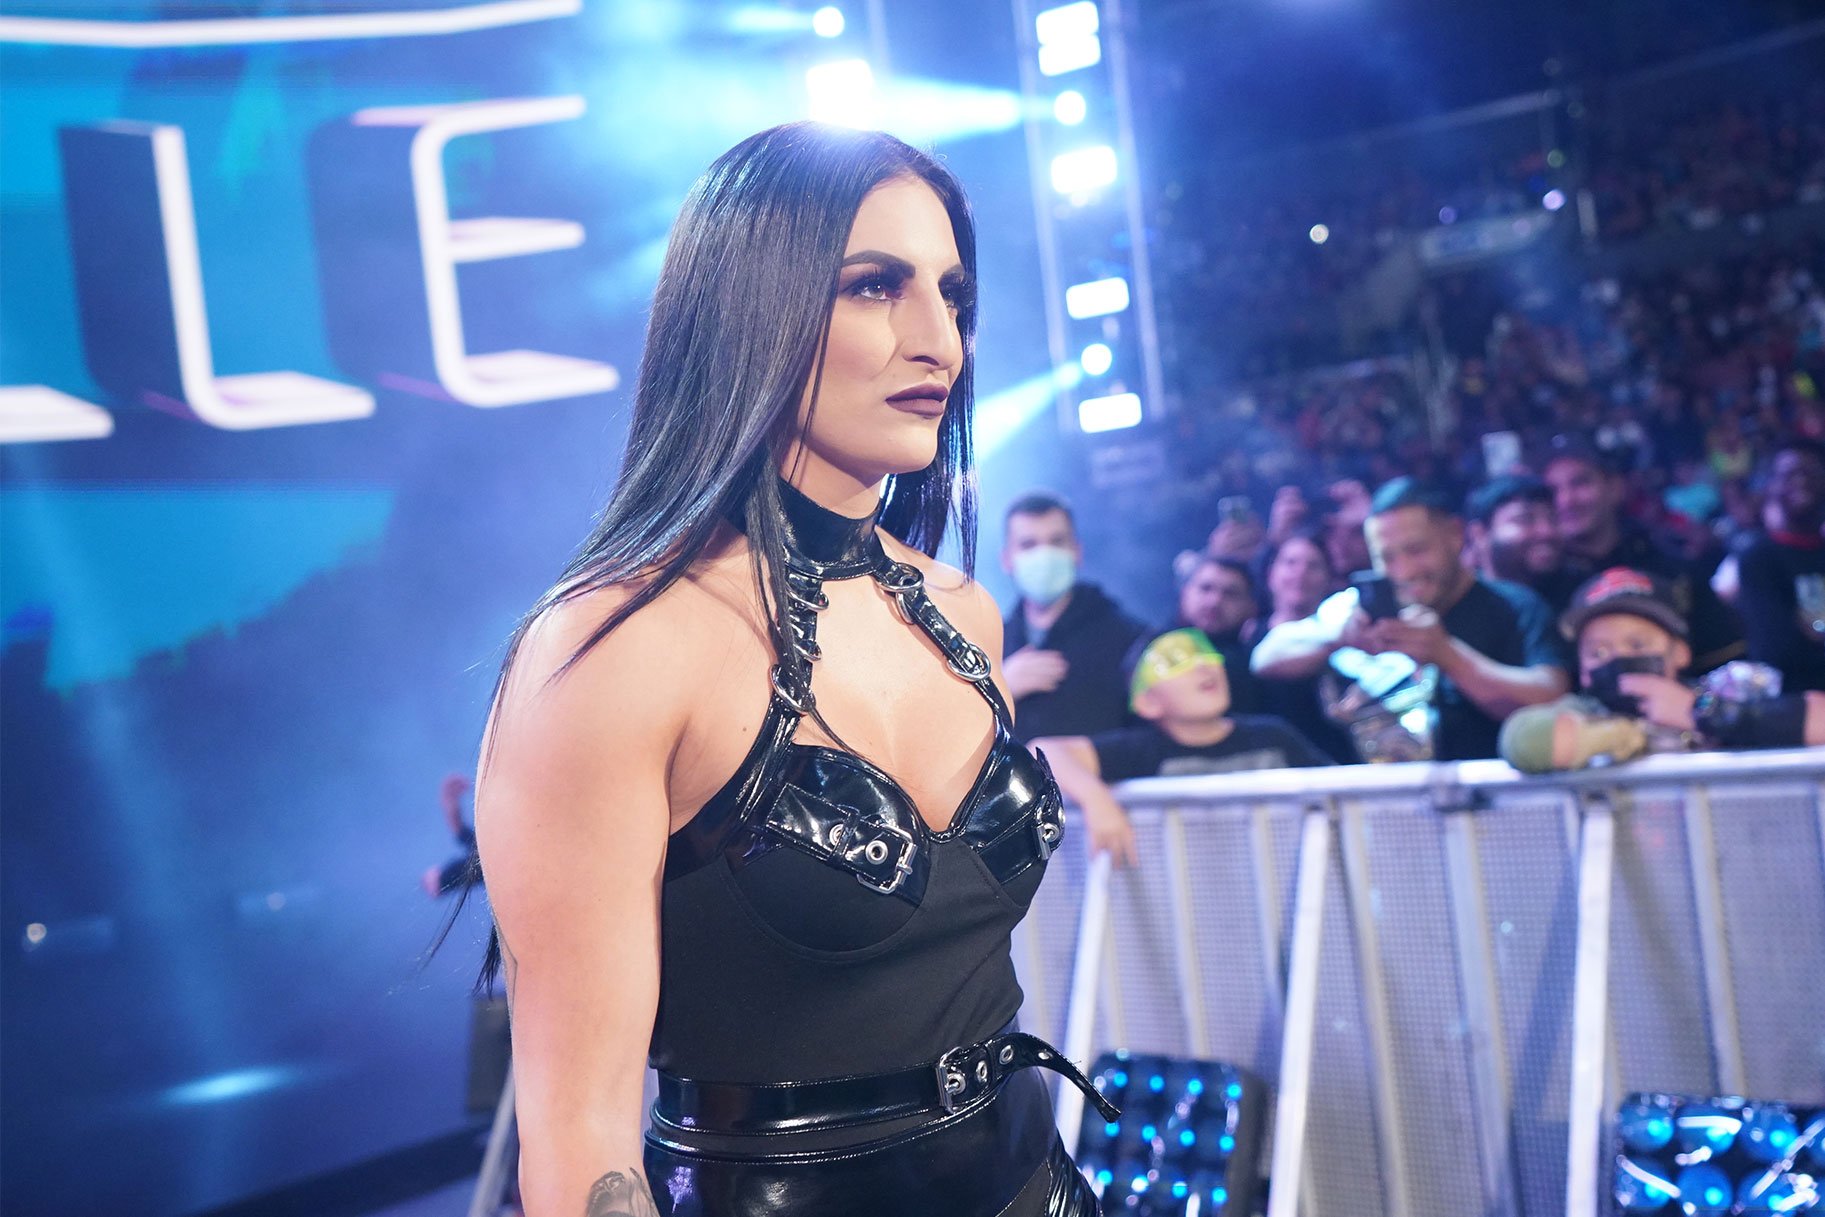 Breaking News: Sonya Deville Anticipated to Make Imminent Comeback, Reports Suggest